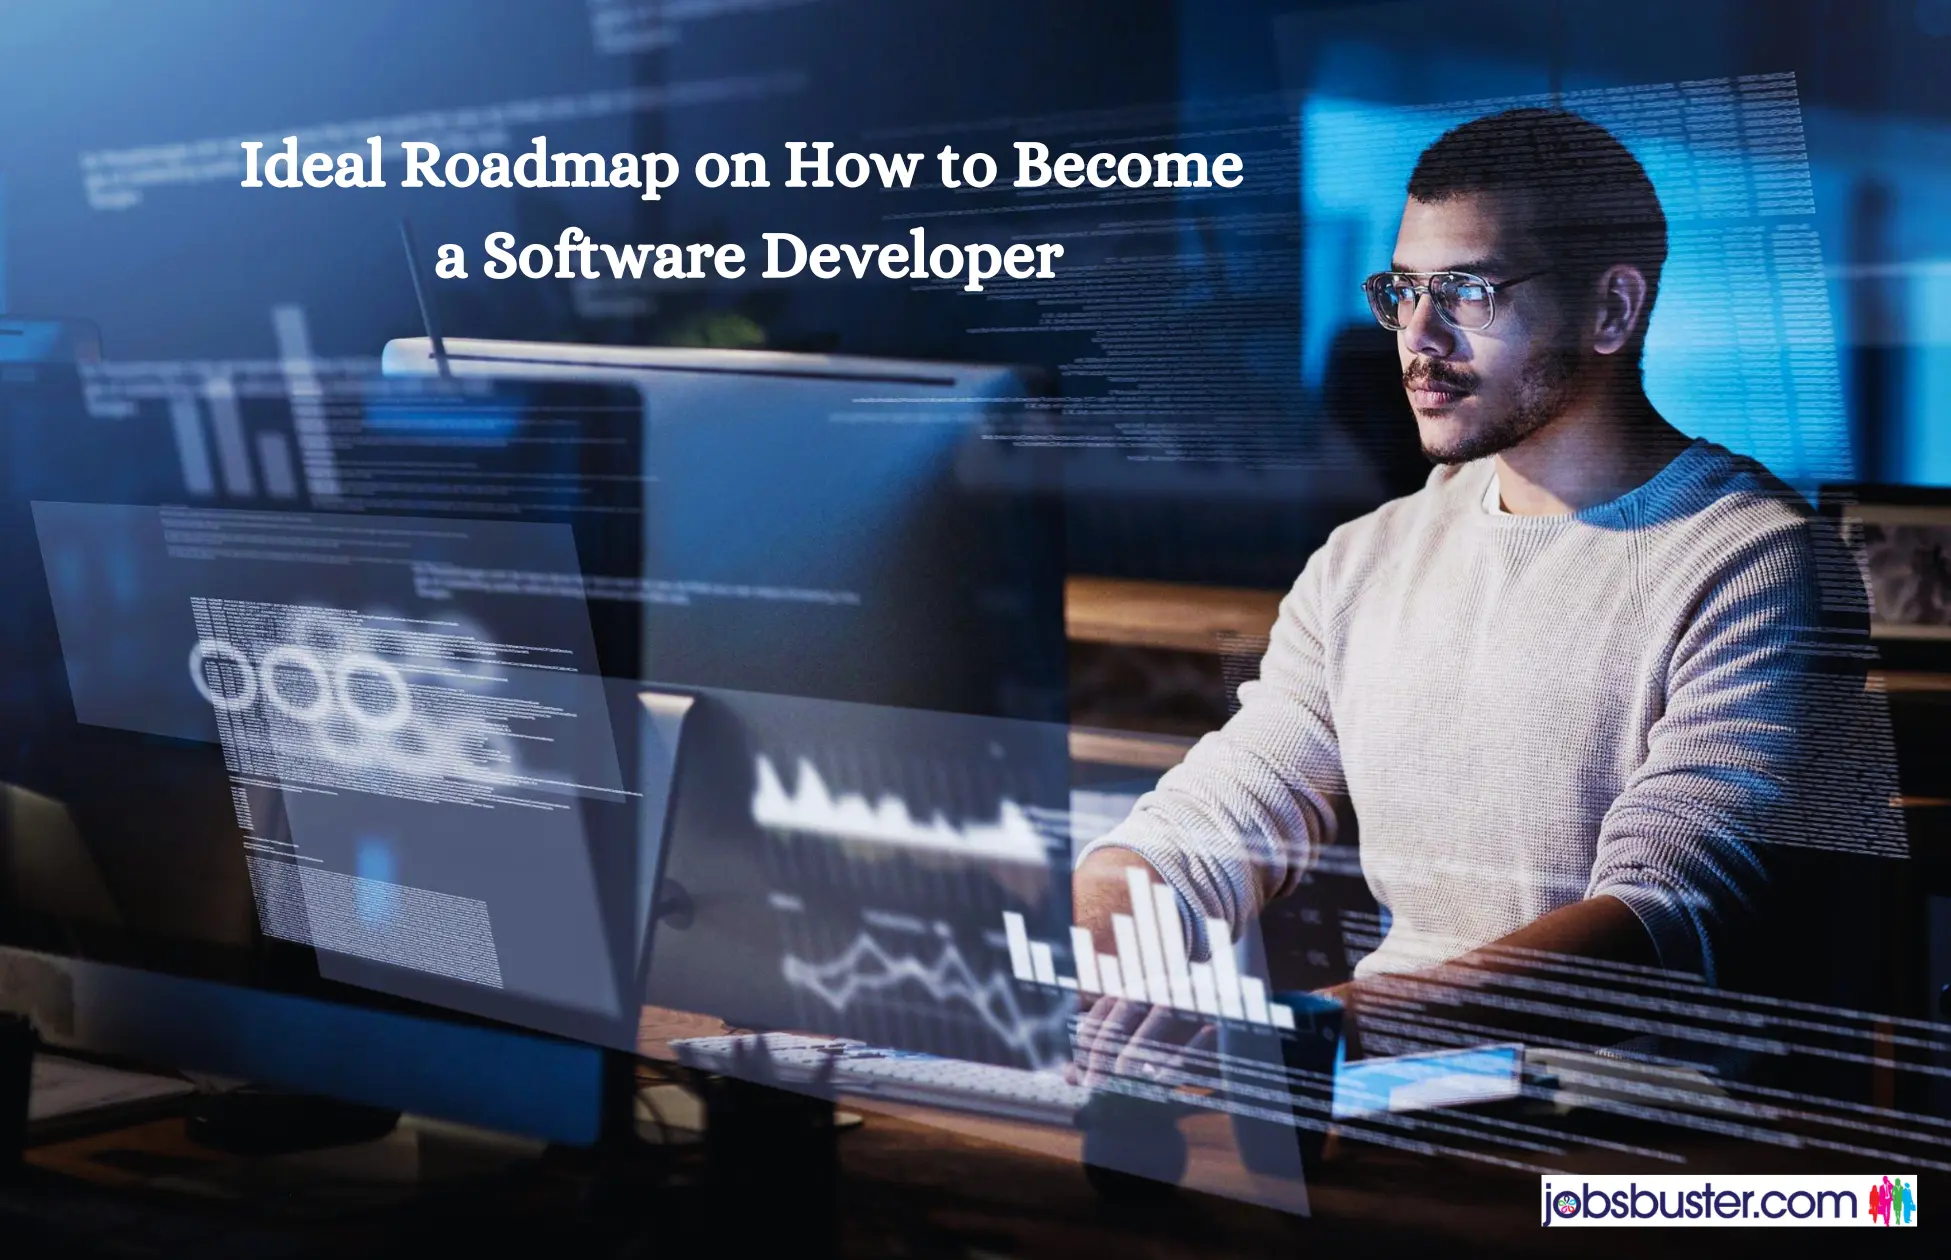 Ideal Roadmap on How to Become a Software Developer